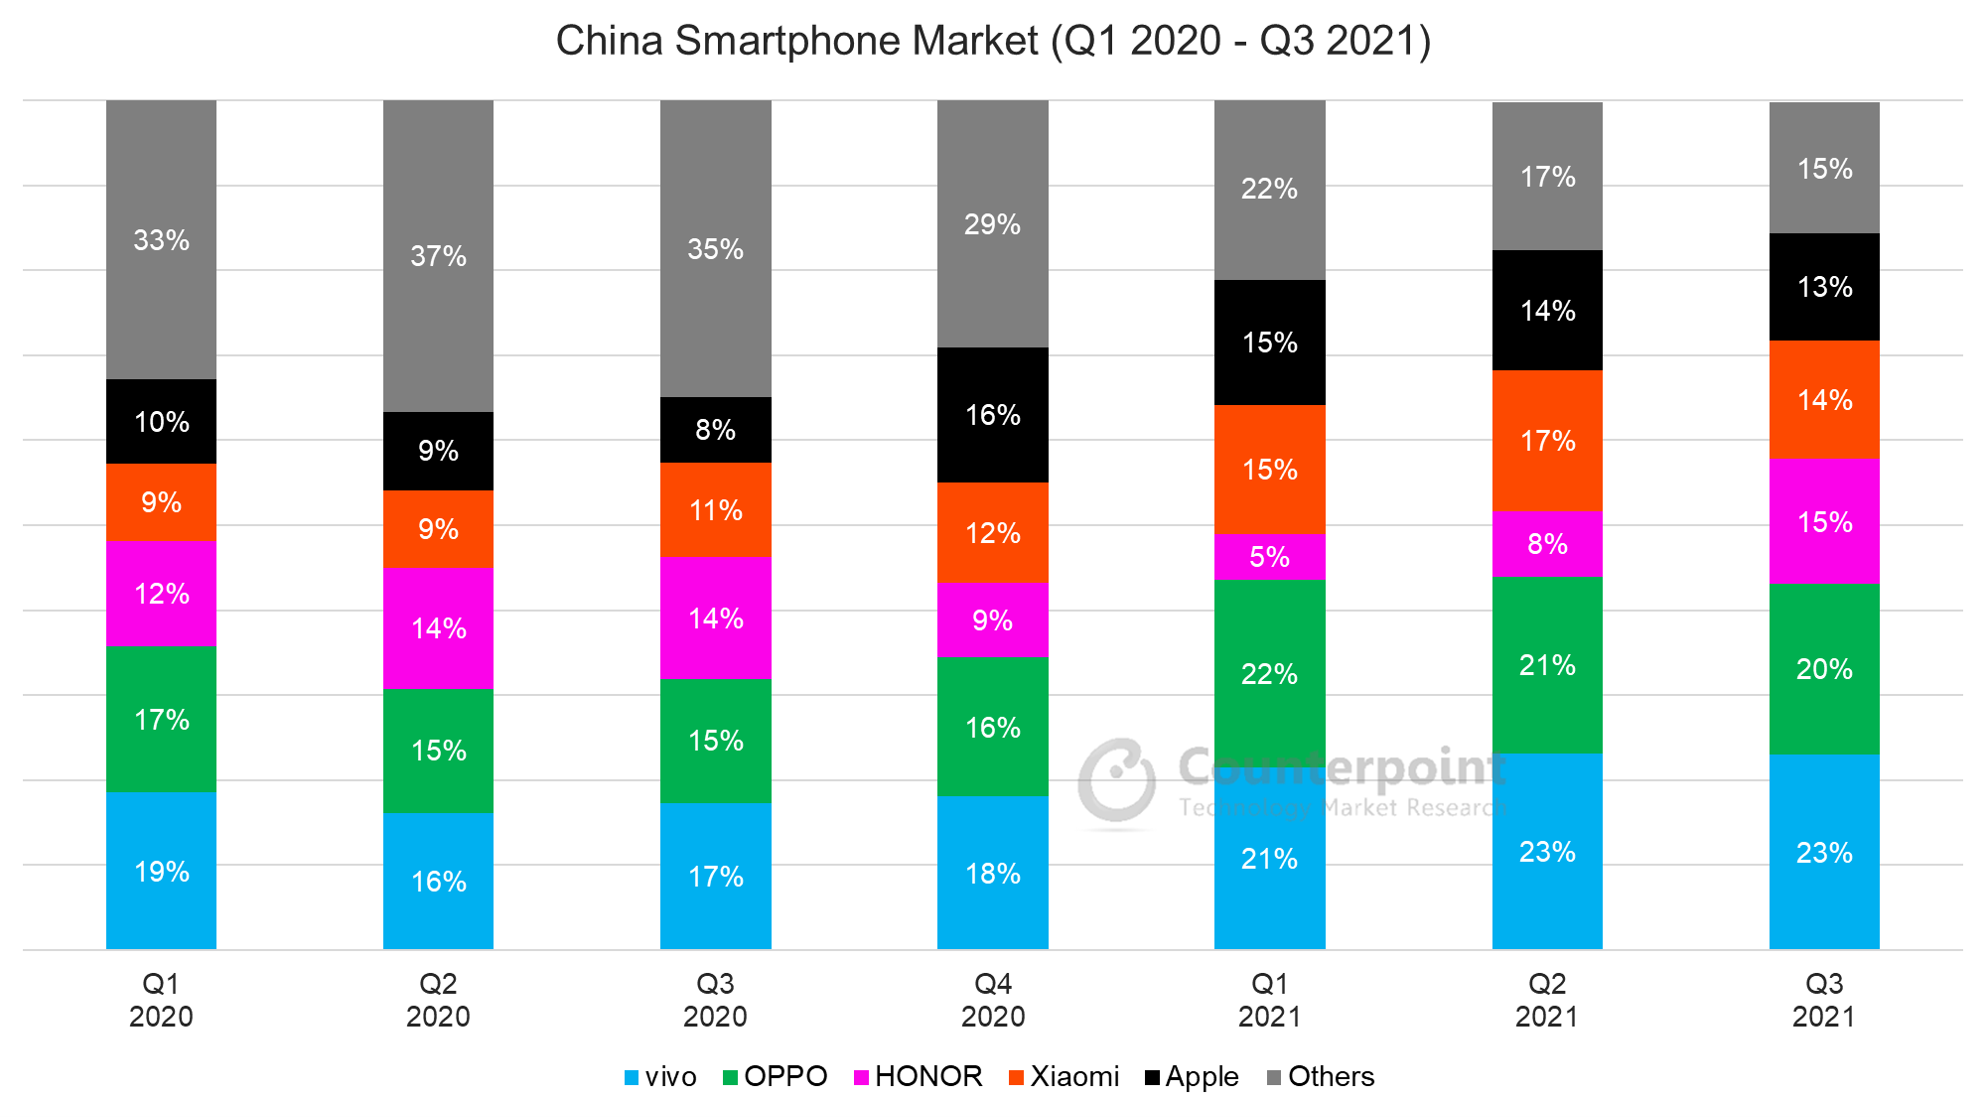 Counterpoint Research China Smartphone Market Q3 2021